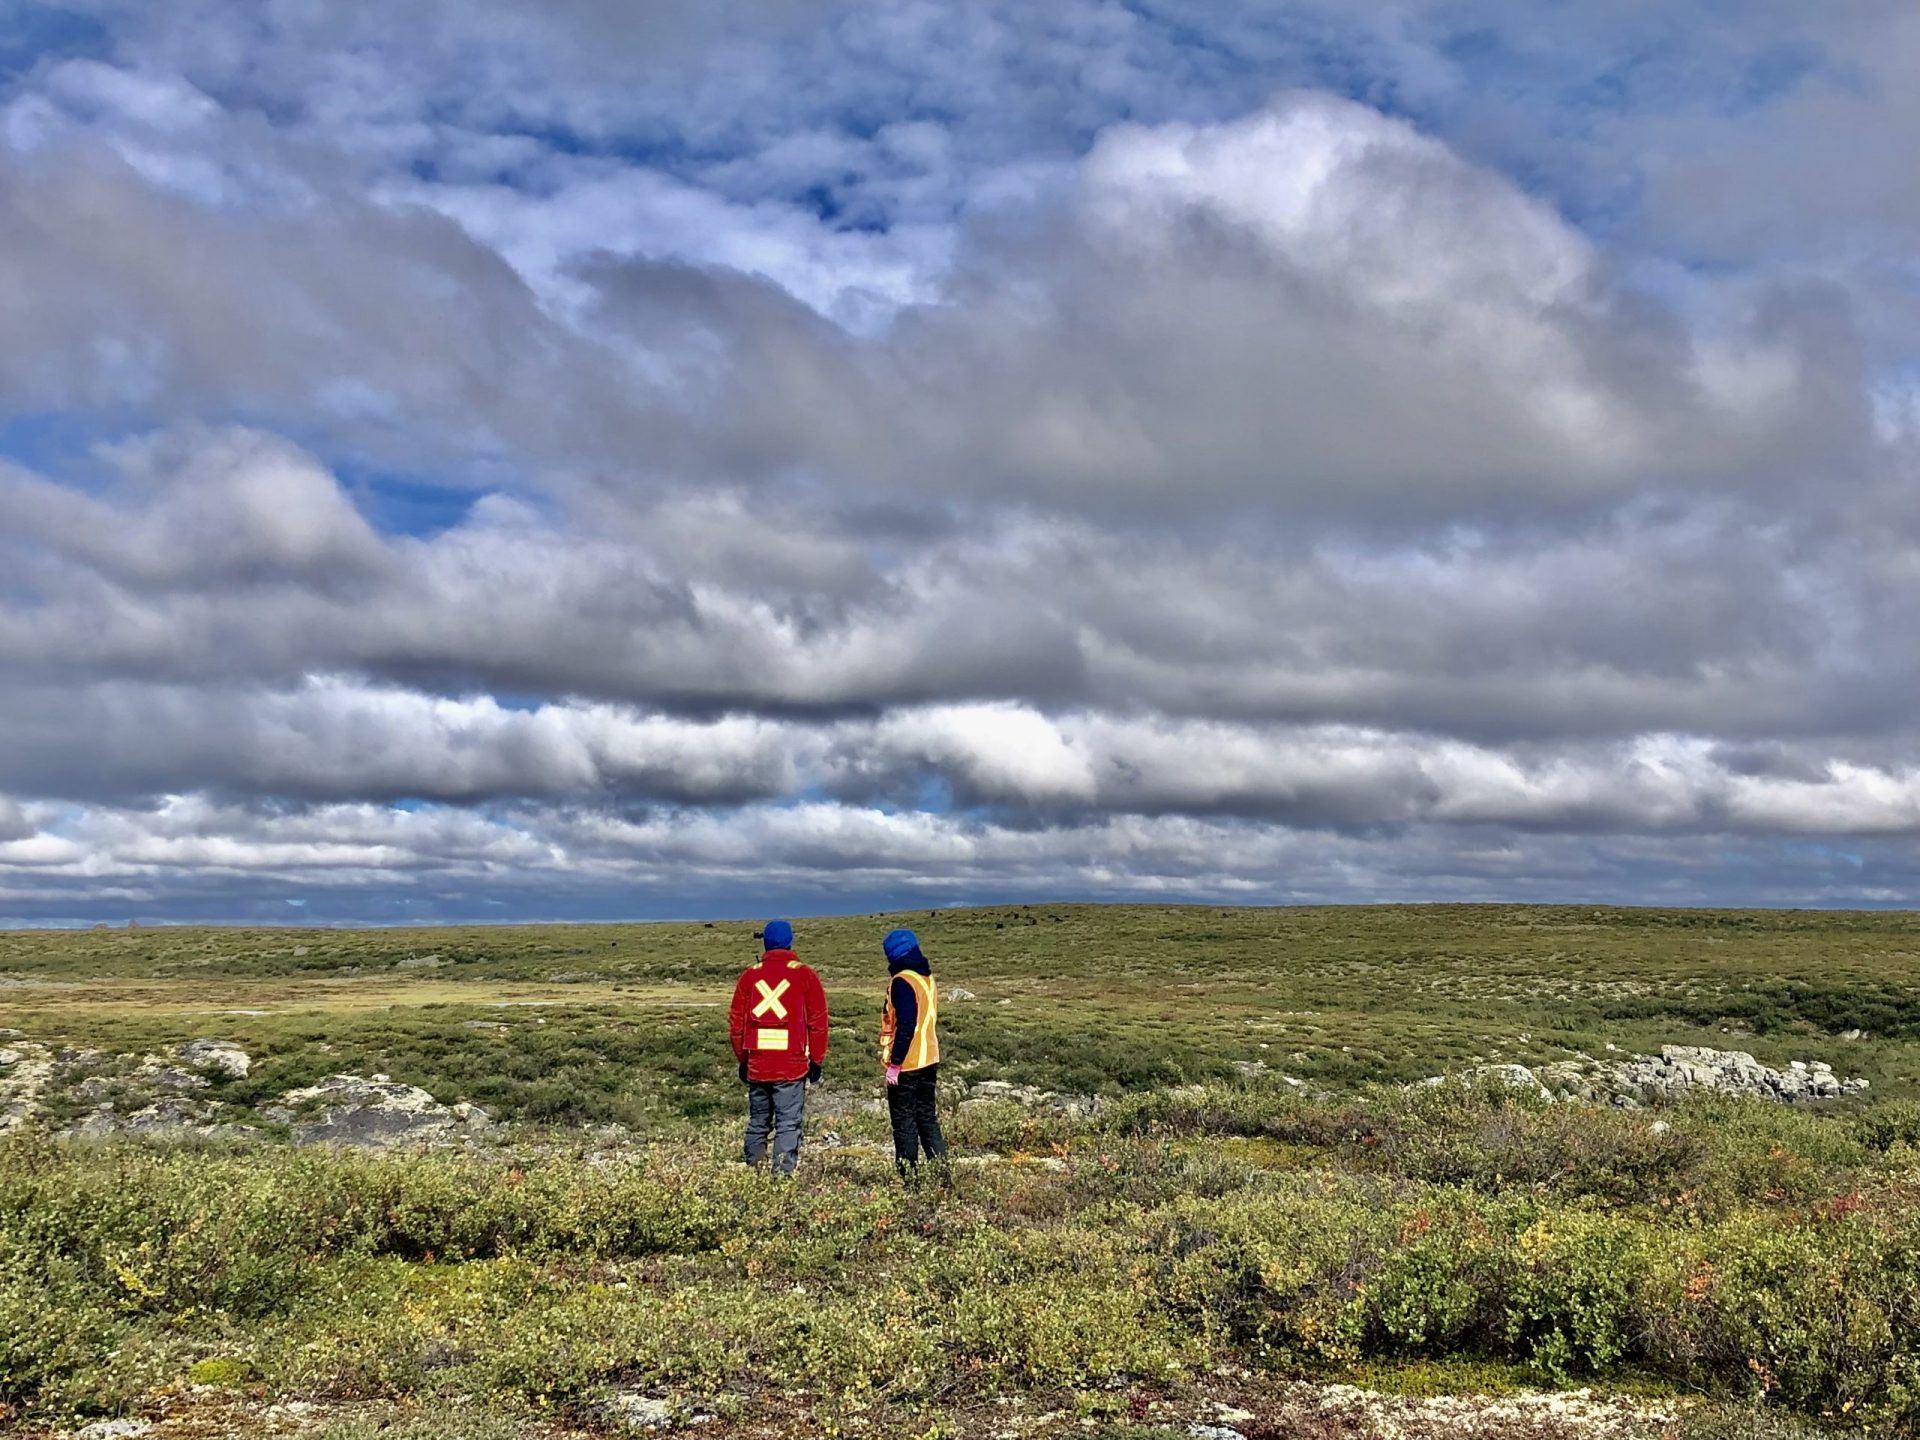 Seminar – 19 April – Variation in the morphology of permafrost peatlands across the transition from continuous to discontinuous permafrost, central Mackenzie Valley.